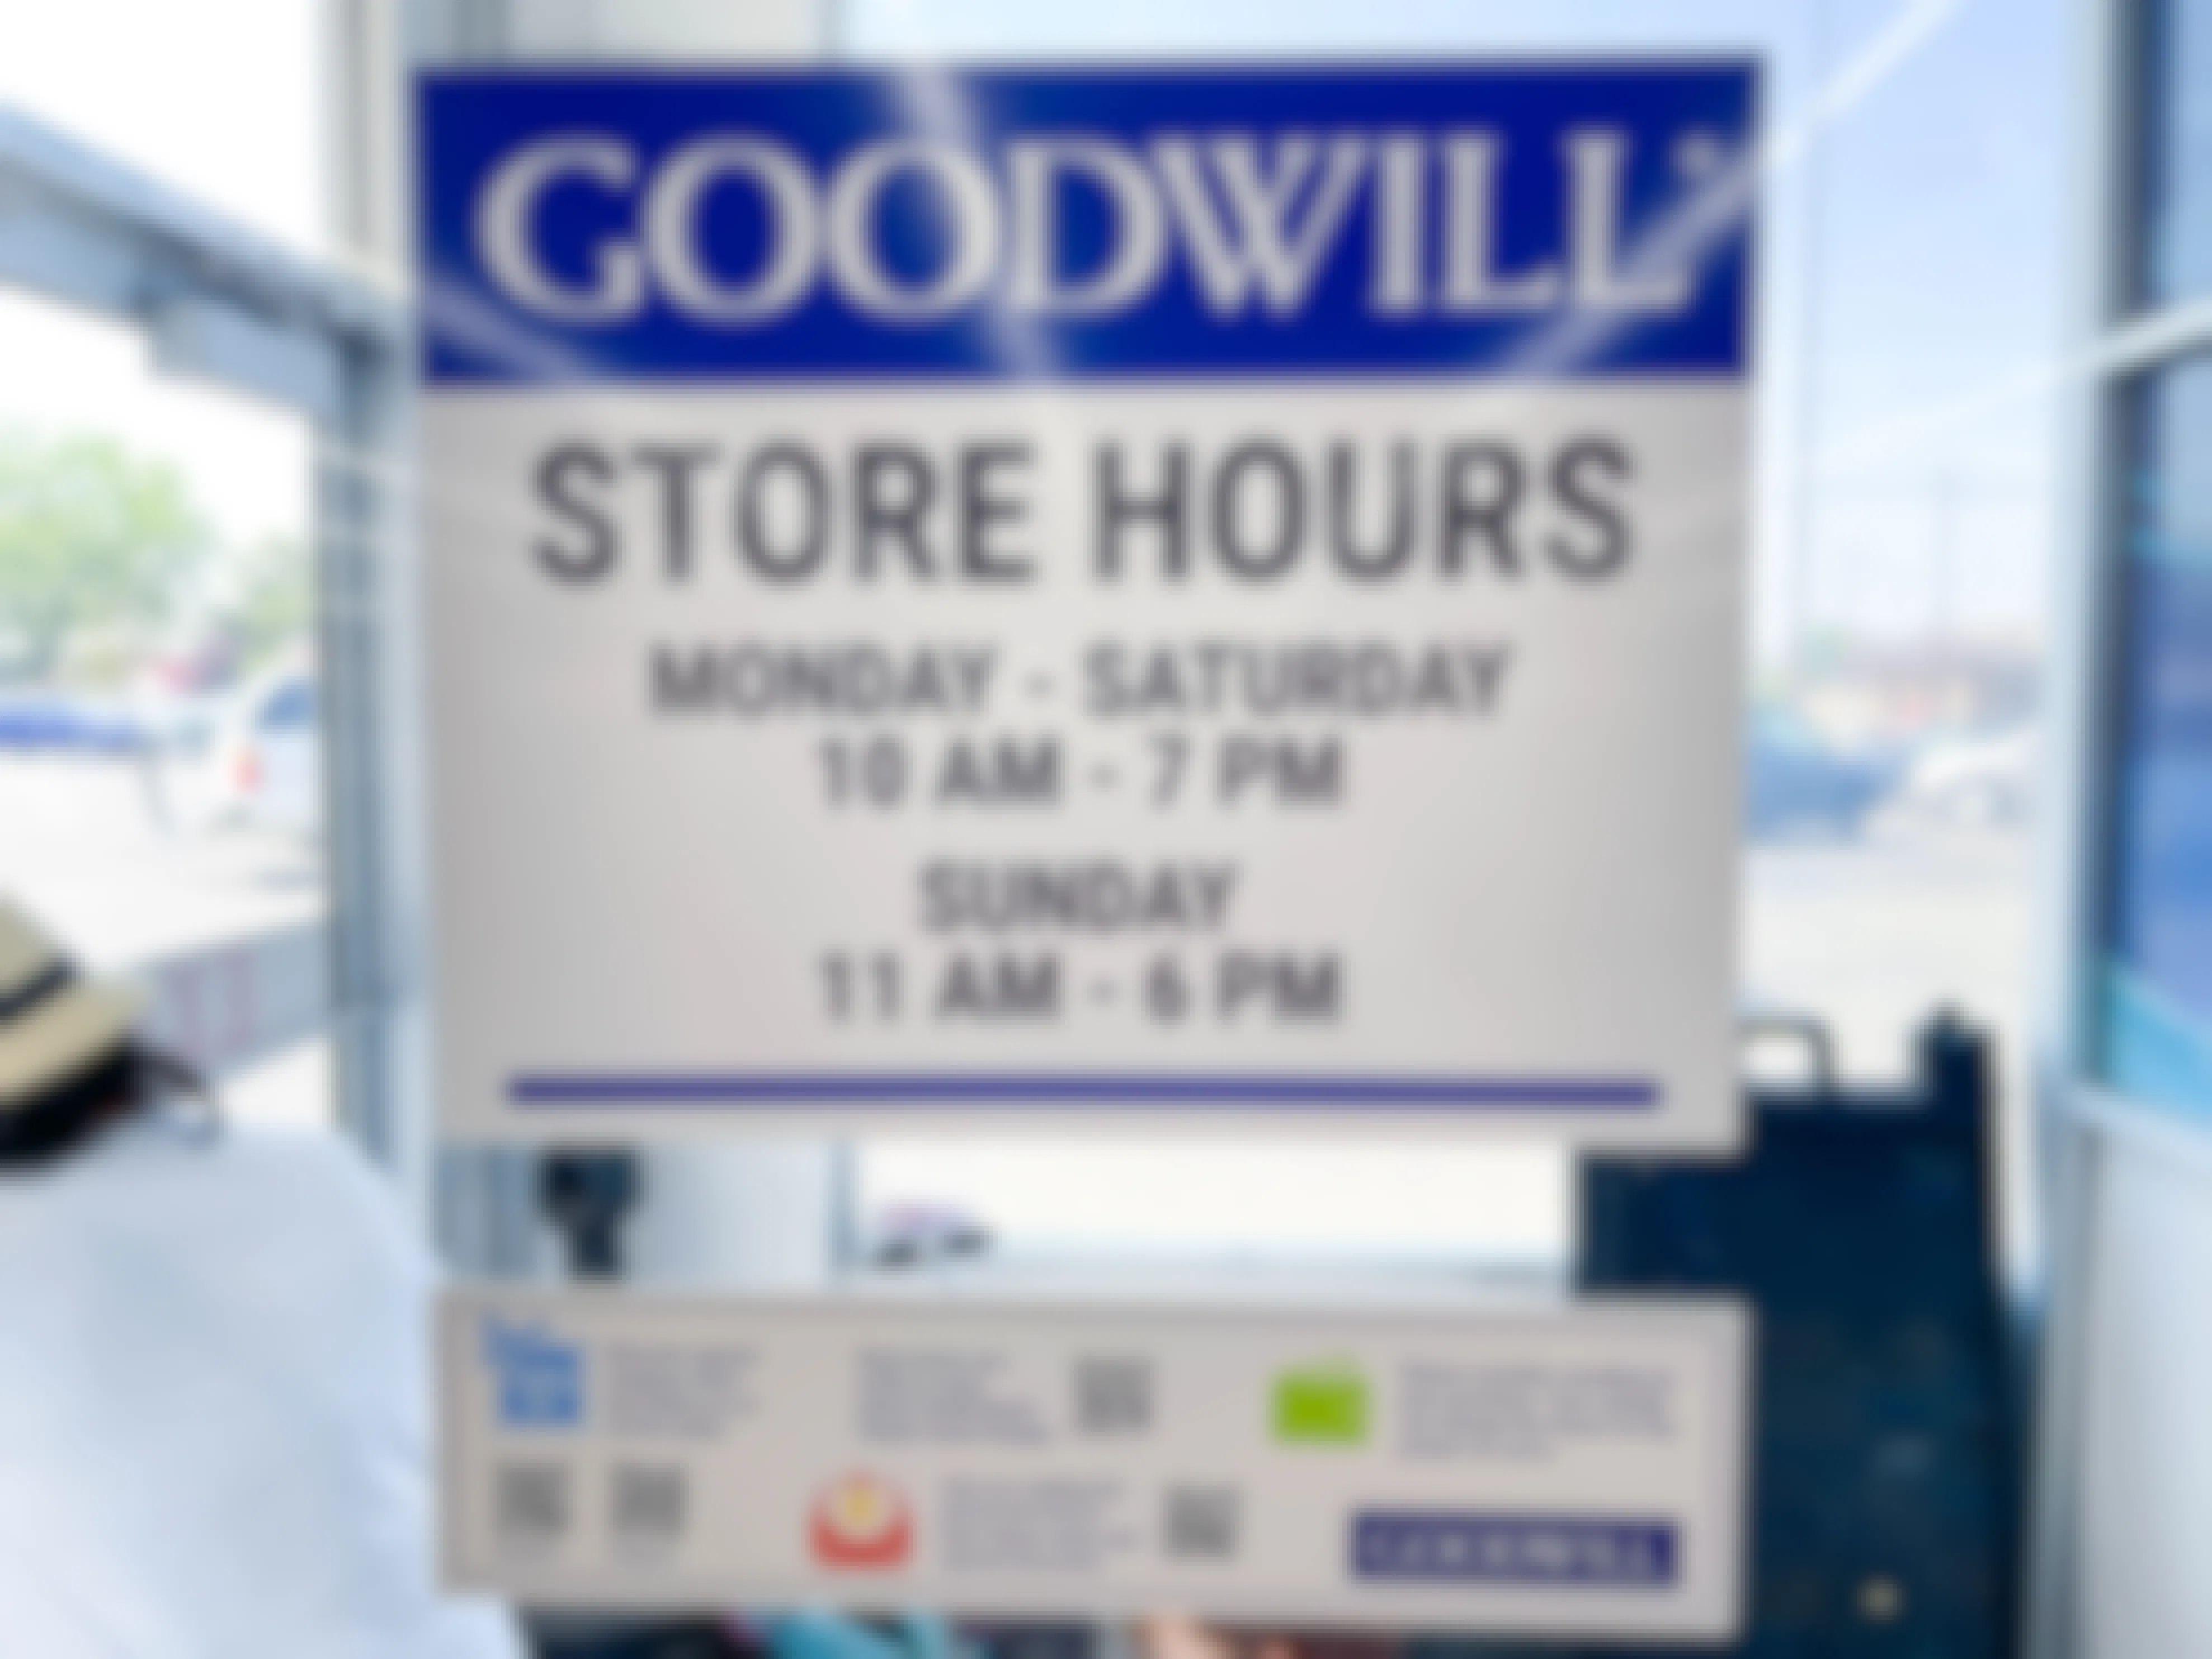 goodwill store hours sign 